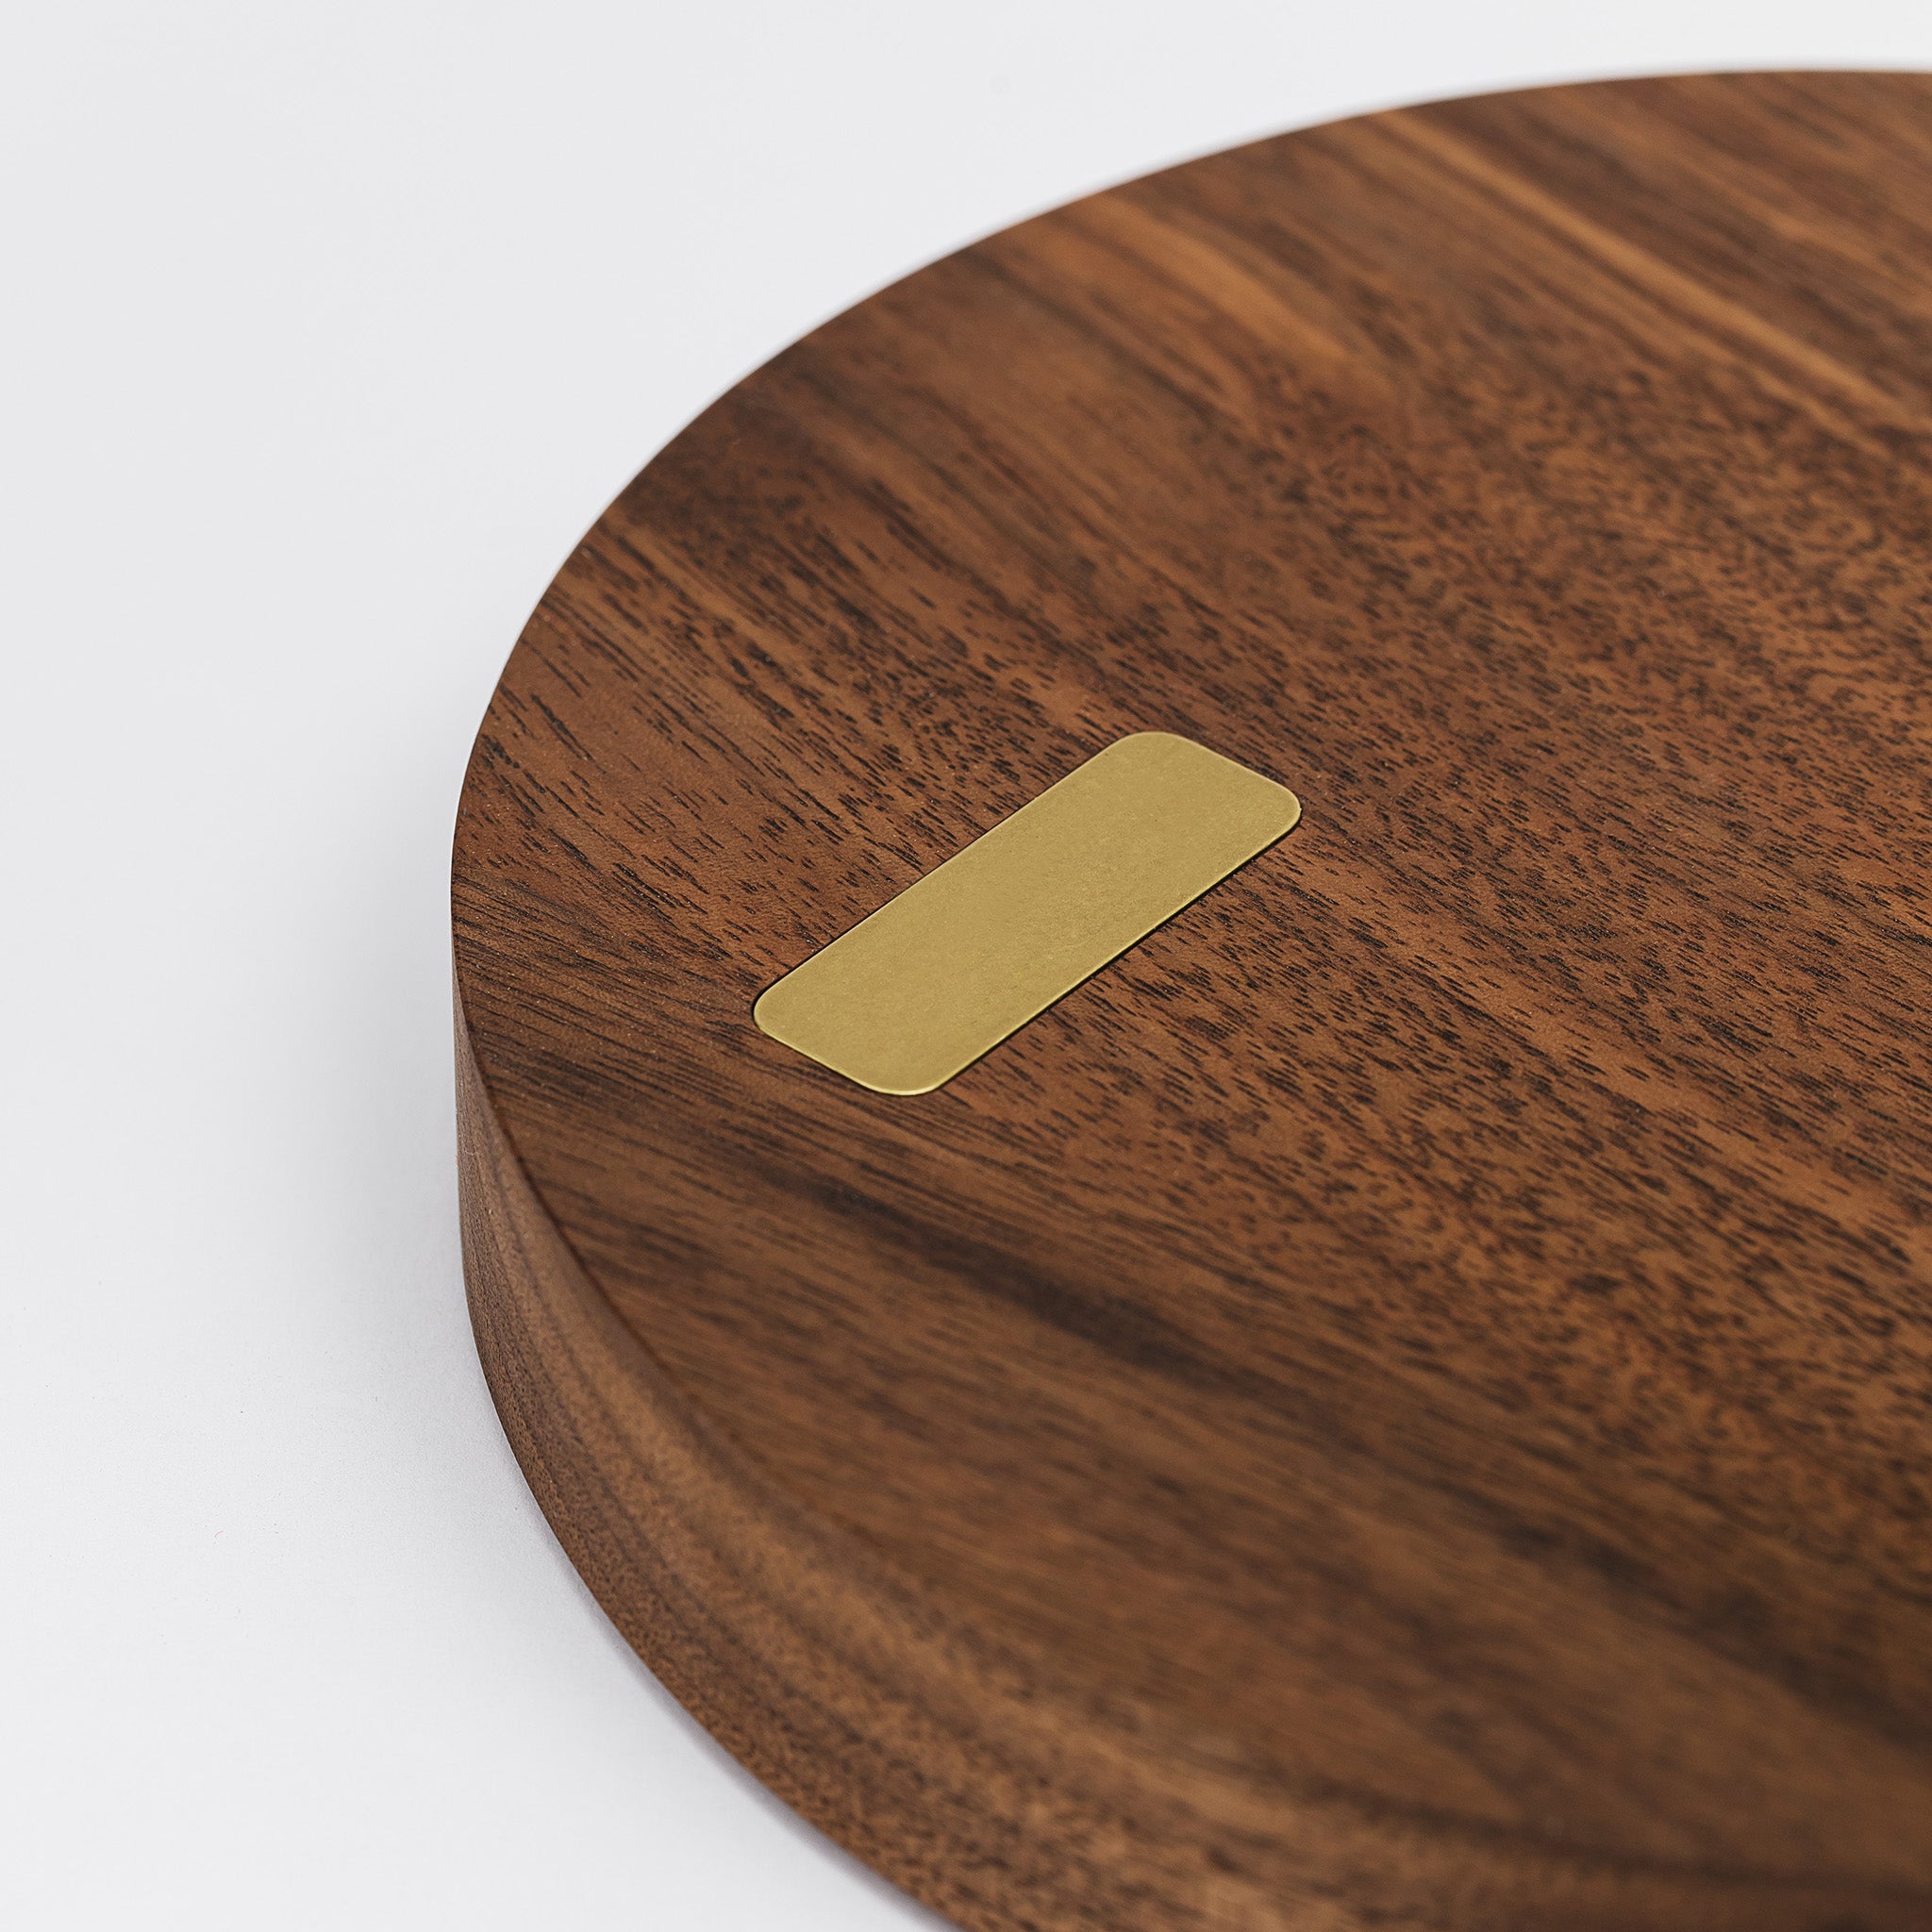 Brushed brass touch pad for dimming and switching on off -walnut